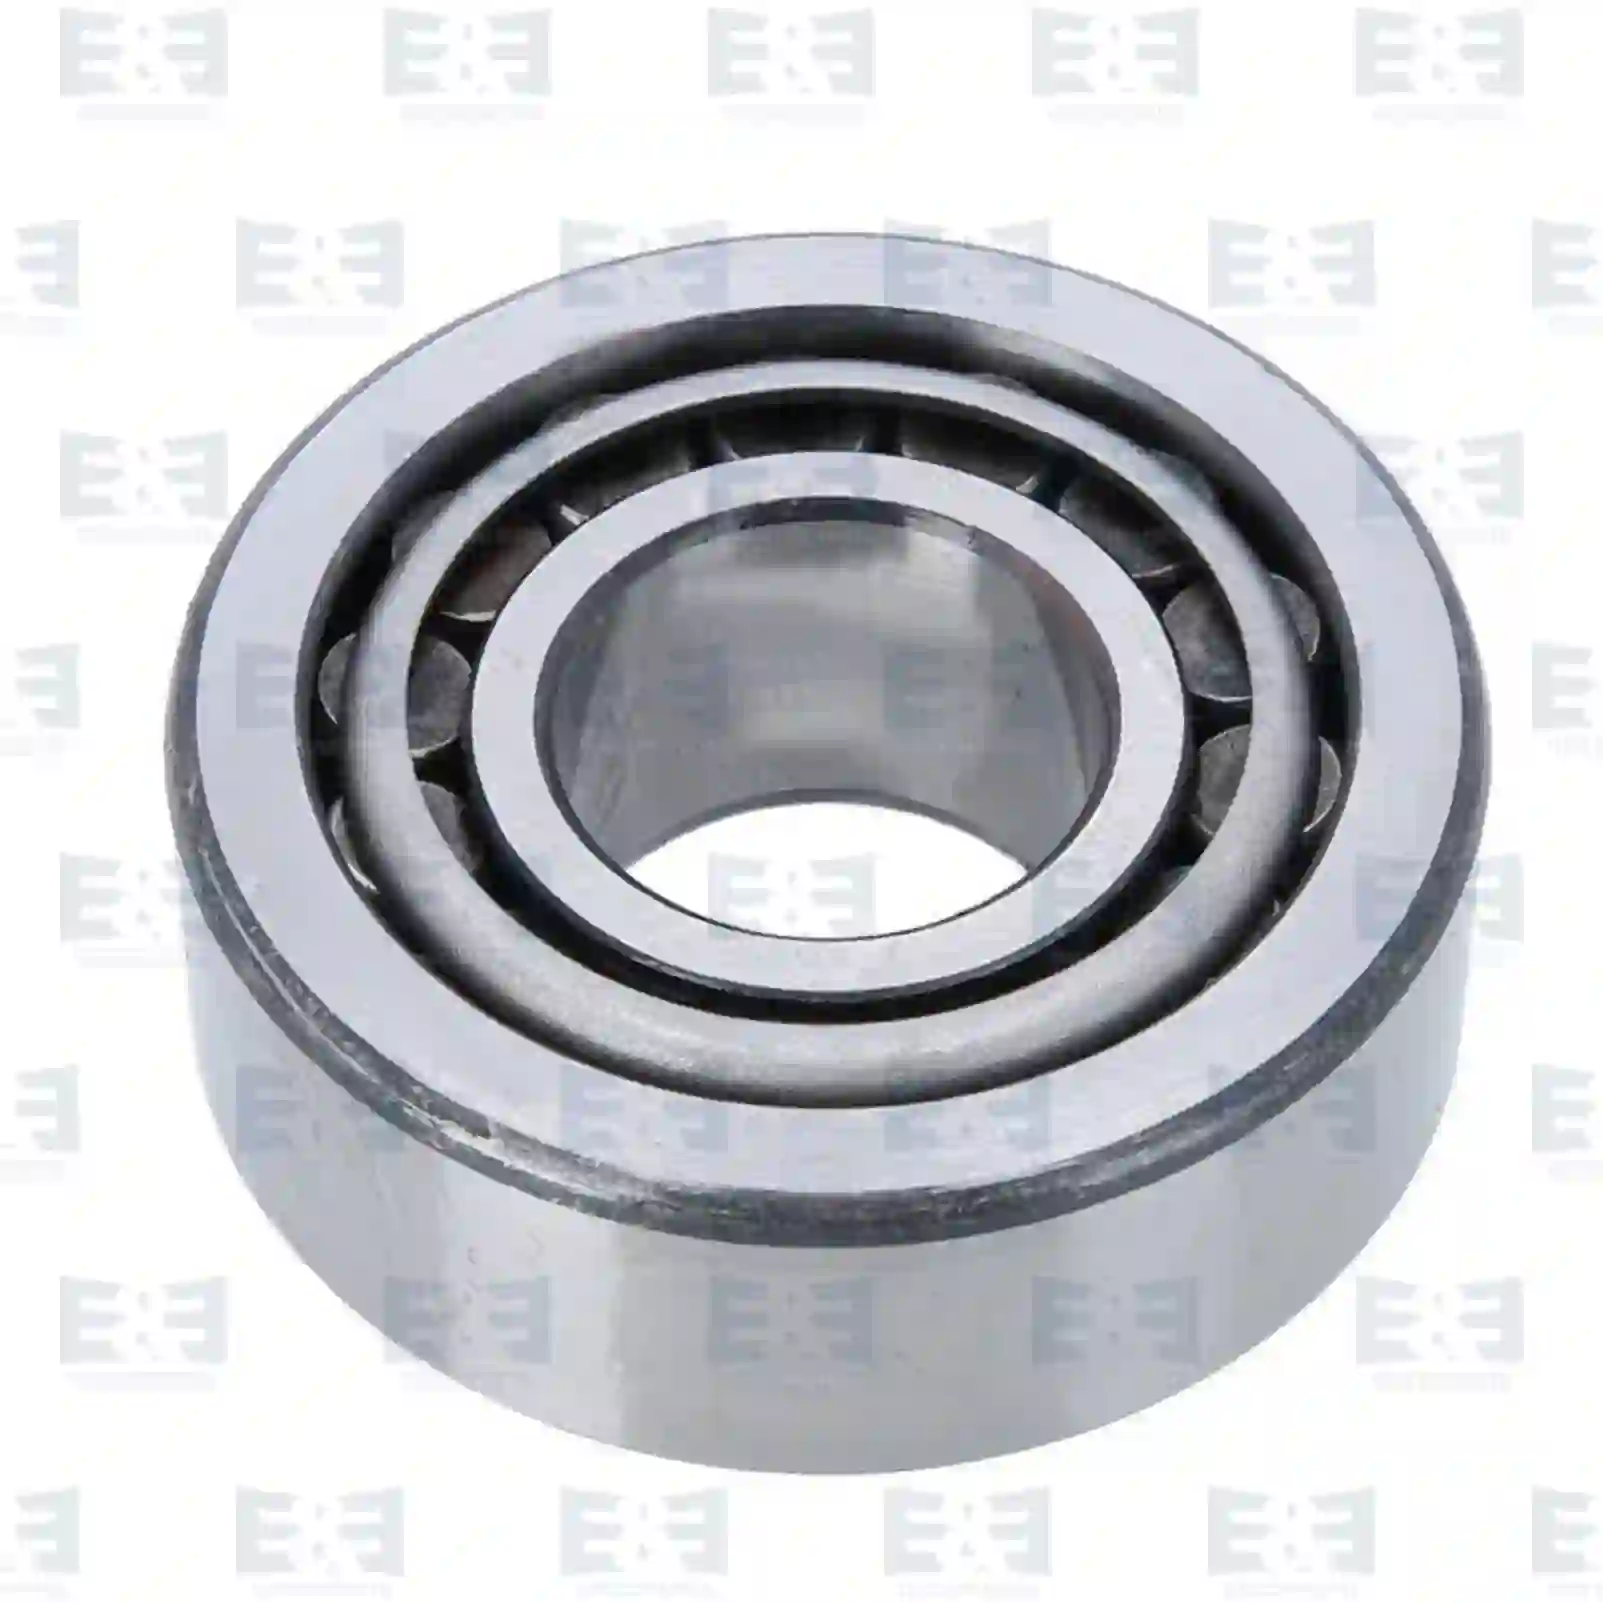 Tapered roller bearing, 2E2285802, 290063314, 0264060300, 26800560, 91124-PH8-008, 06324902800, 06324990112, 34934200002, 88934206010, A0772320600, A0773230600, 0009819505, 000720032306, 0019818305, 0019818705, 0019819505, 0069815905, 3129810205, 3129810501, 09022-0015P, 38120-13200, 38120-13201, 38120-13210, 7058598, 0023432306, 0773230680, 14614, 0009815318, 806330010, 11073, 66001044, 6601044, ZG03010-0008 ||  2E2285802 E&E Truck Spare Parts | Truck Spare Parts, Auotomotive Spare Parts Tapered roller bearing, 2E2285802, 290063314, 0264060300, 26800560, 91124-PH8-008, 06324902800, 06324990112, 34934200002, 88934206010, A0772320600, A0773230600, 0009819505, 000720032306, 0019818305, 0019818705, 0019819505, 0069815905, 3129810205, 3129810501, 09022-0015P, 38120-13200, 38120-13201, 38120-13210, 7058598, 0023432306, 0773230680, 14614, 0009815318, 806330010, 11073, 66001044, 6601044, ZG03010-0008 ||  2E2285802 E&E Truck Spare Parts | Truck Spare Parts, Auotomotive Spare Parts